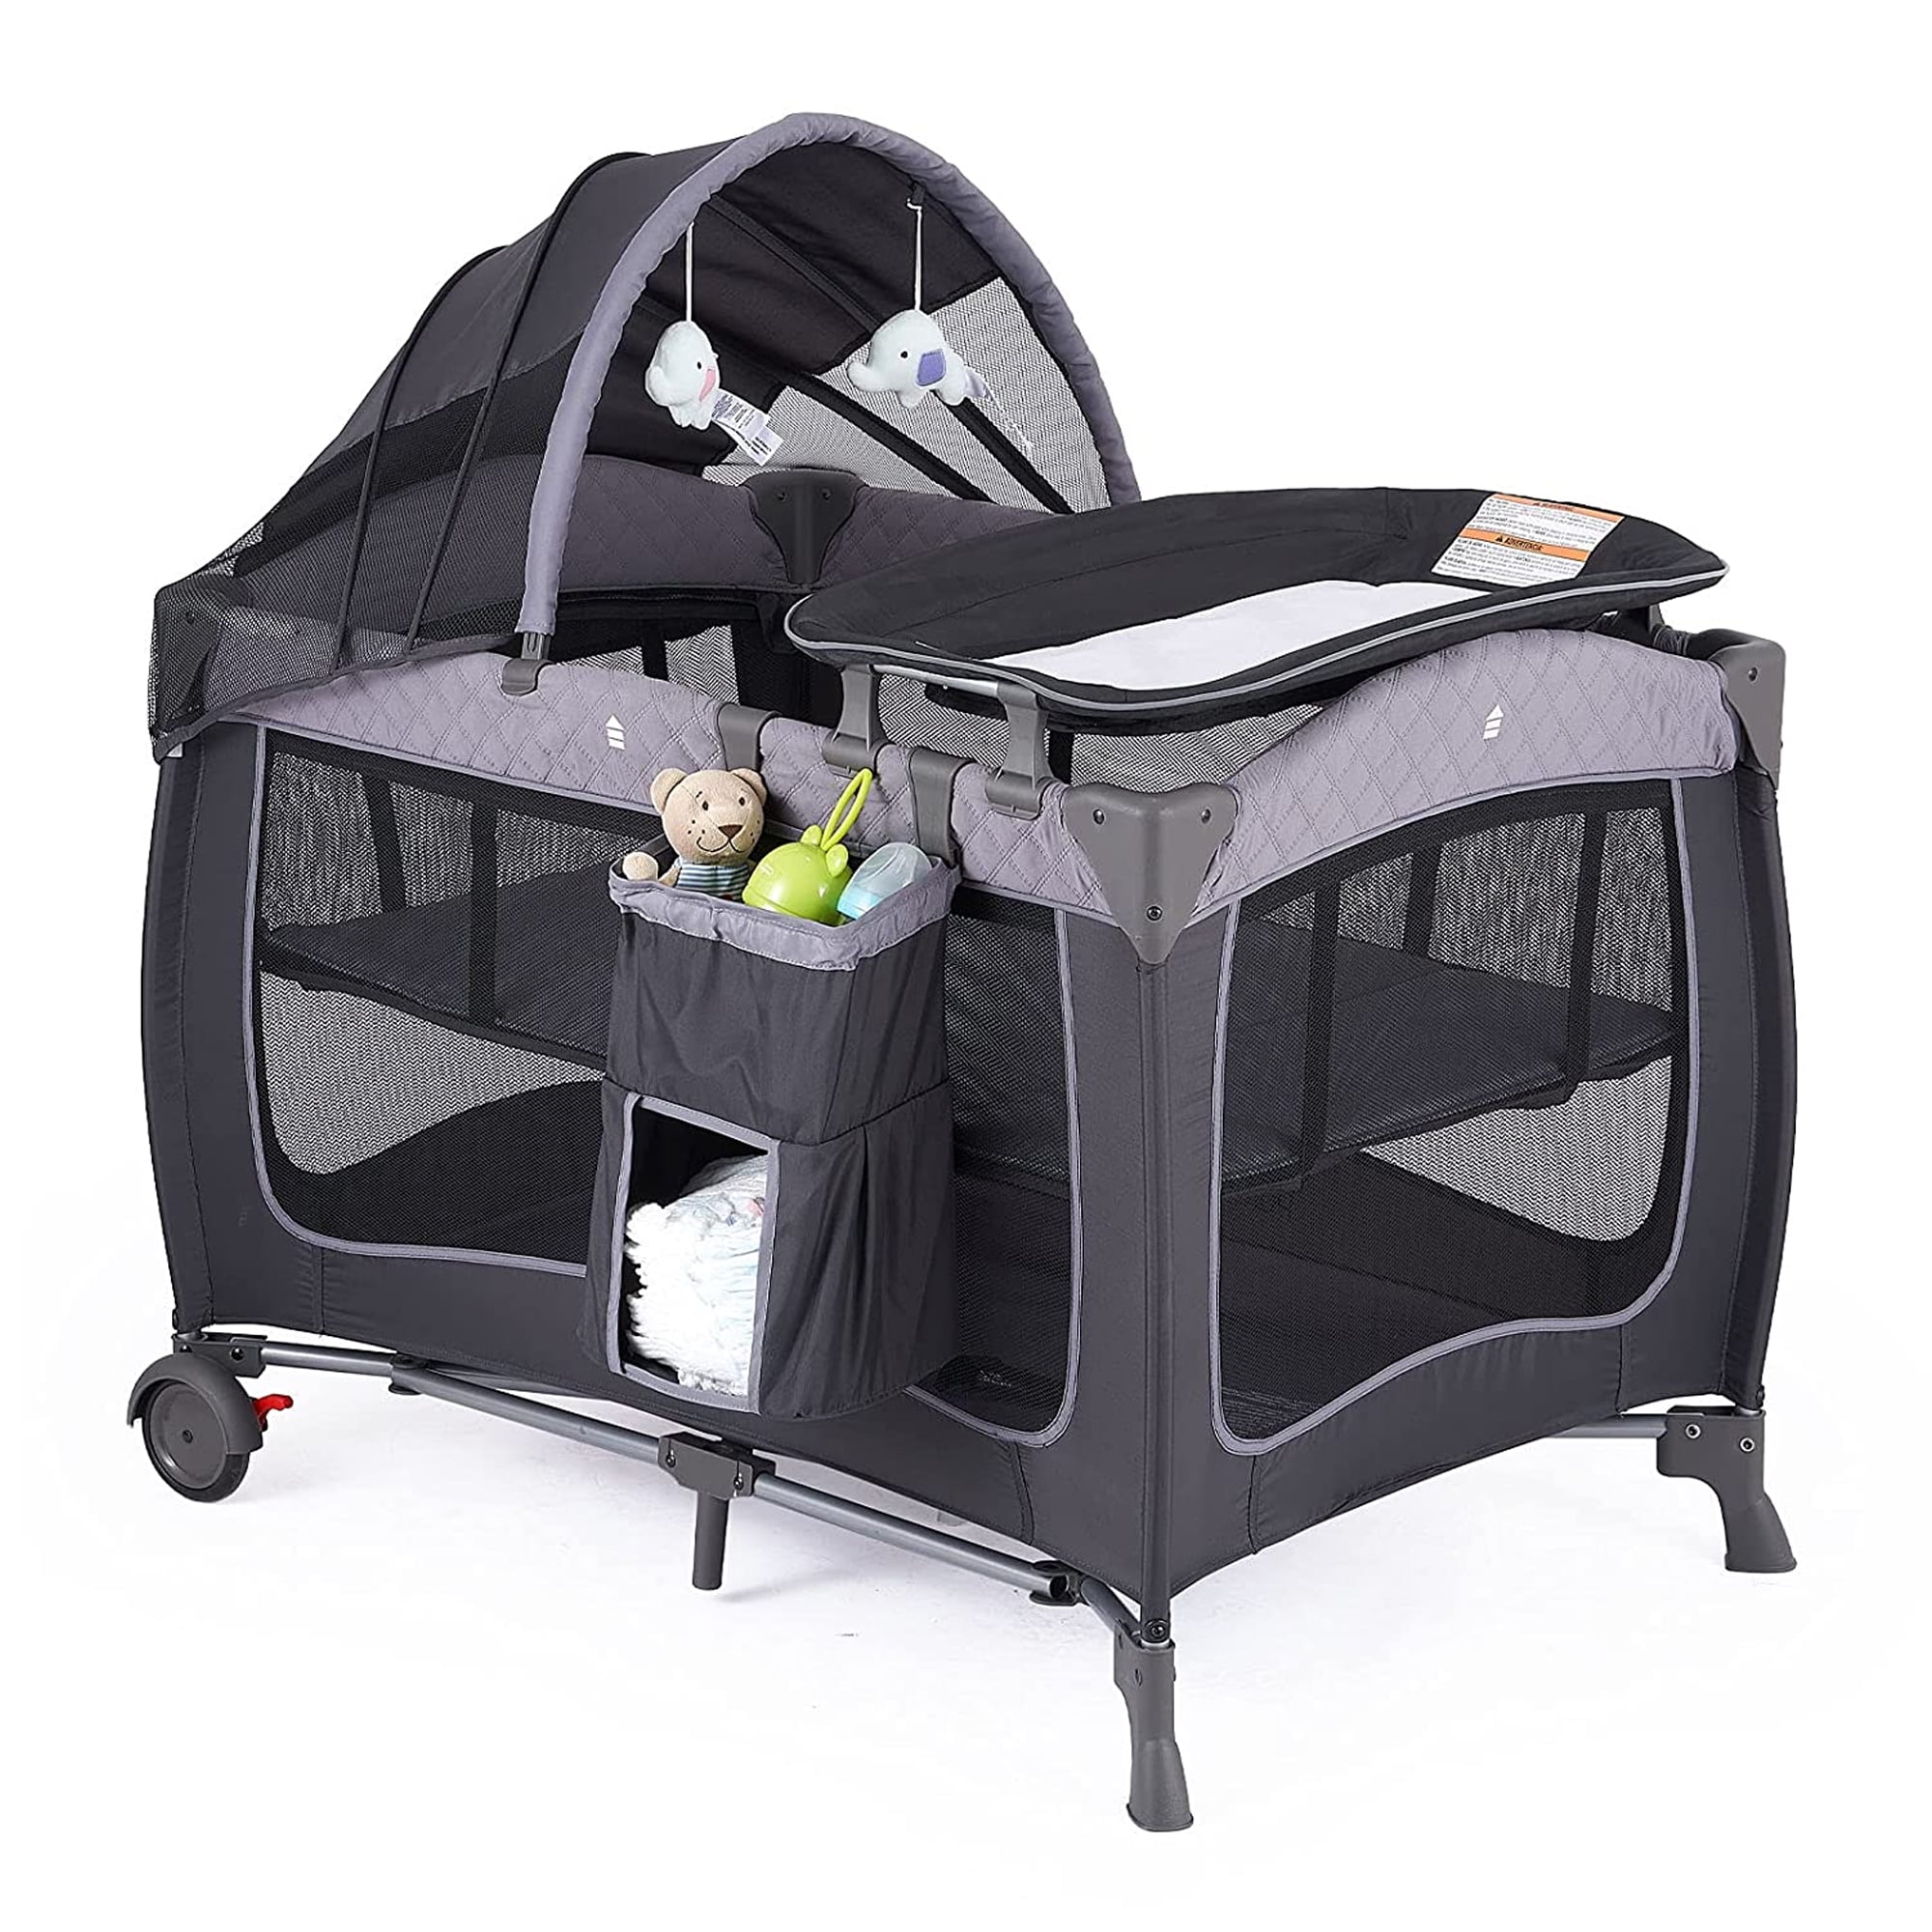 Pamo Babe Unisex Portable Baby Nursery Center Play Yard Include Wheels, Canopy, Changing Table for Newborn(Grey)